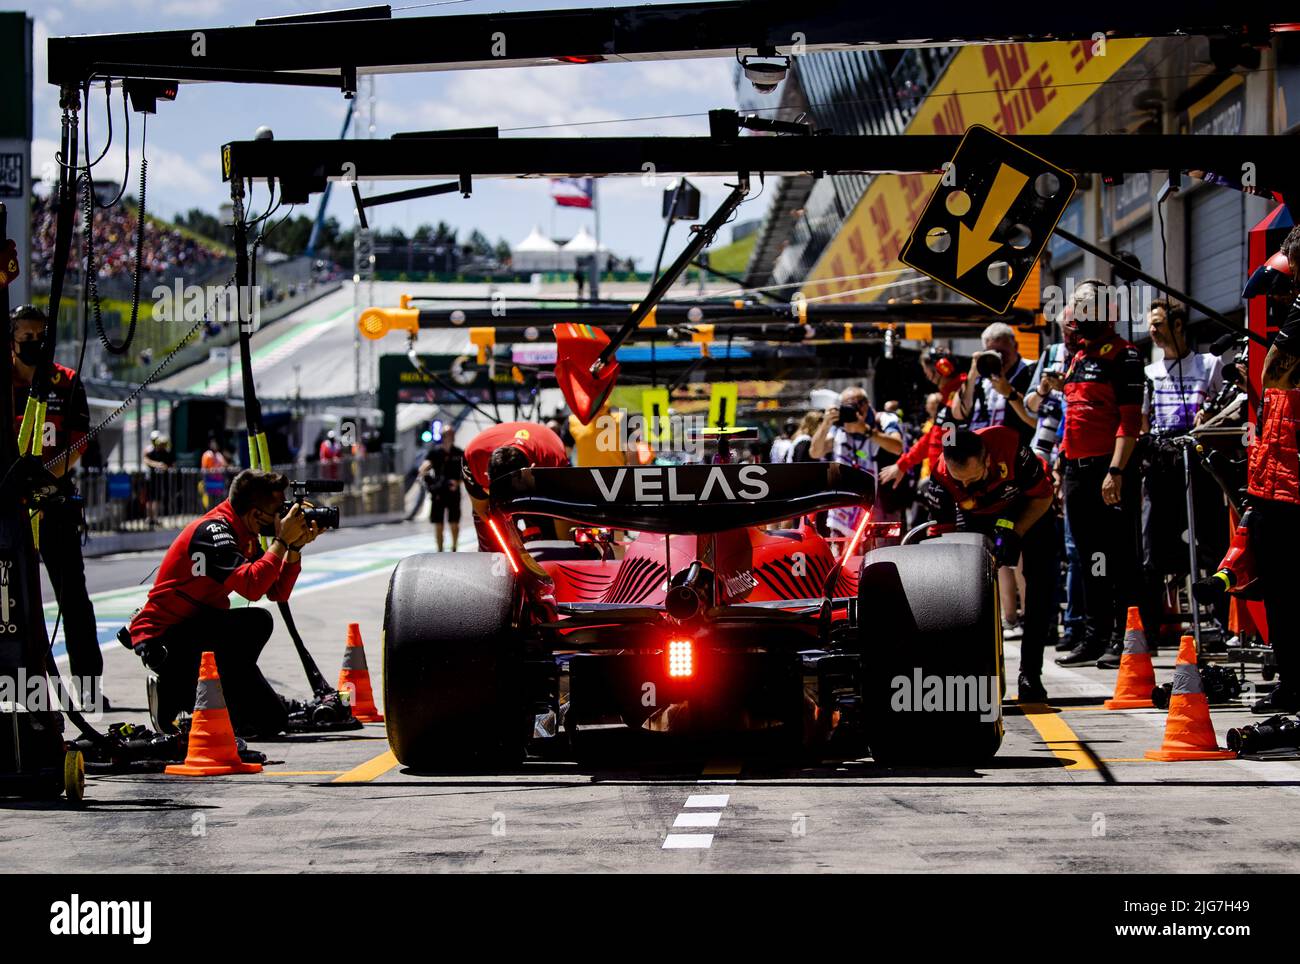 SPIELBERG - Carlos Sainz (55) with the Ferrari in the pit lane during practice 1 ahead of the F1 Grand Prix of Austria at the Red Bull Ring on July 8, 2022 in Spielberg, Austria. ANP SEM VAN DER WAL Credit: ANP/Alamy Live News Stock Photo